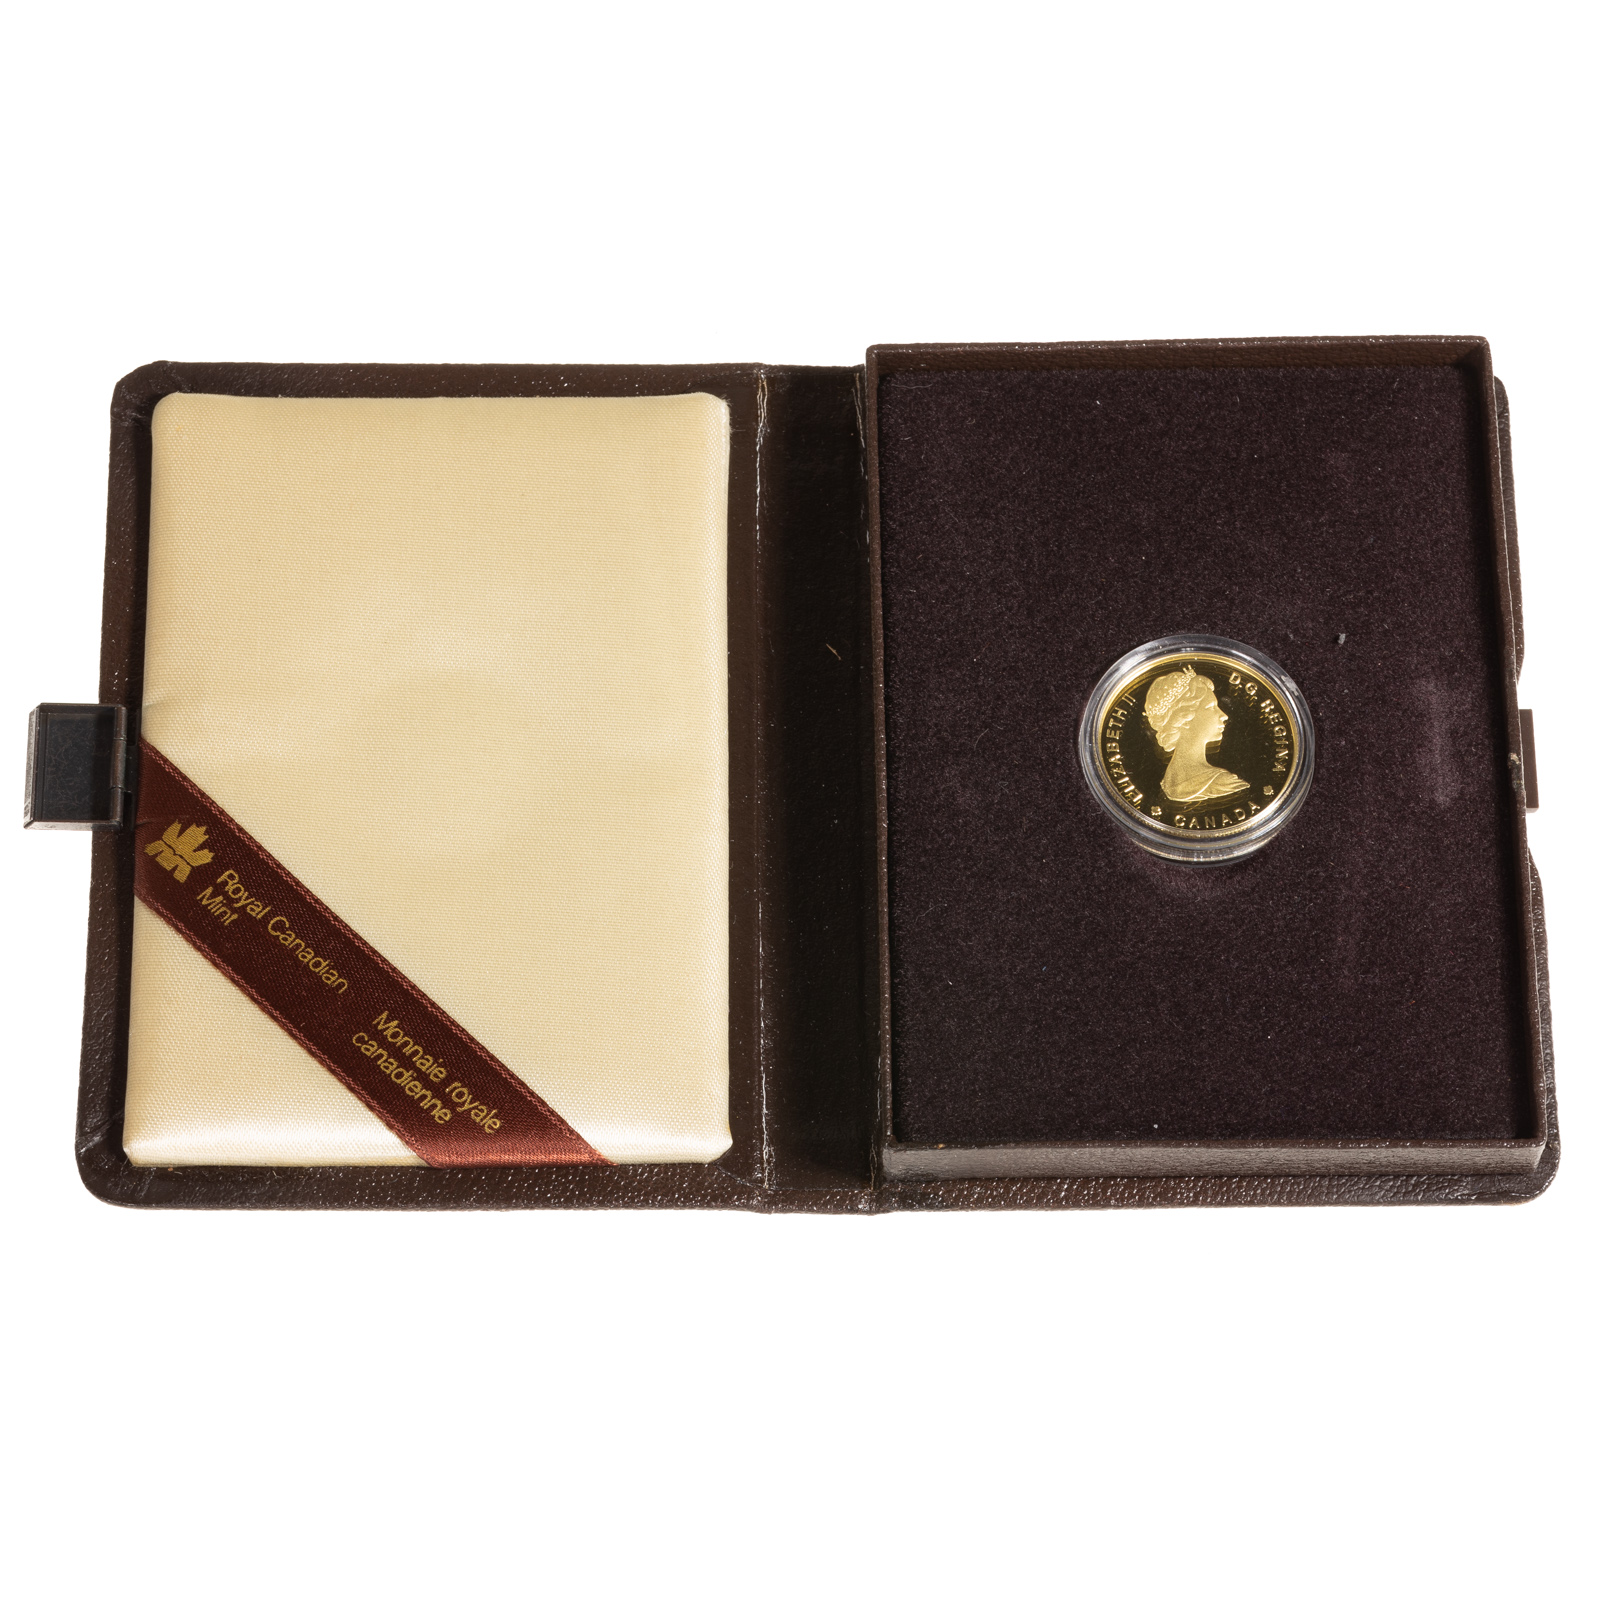 1985 NATIONAL PARKS GOLD PROOF 2e8fd0